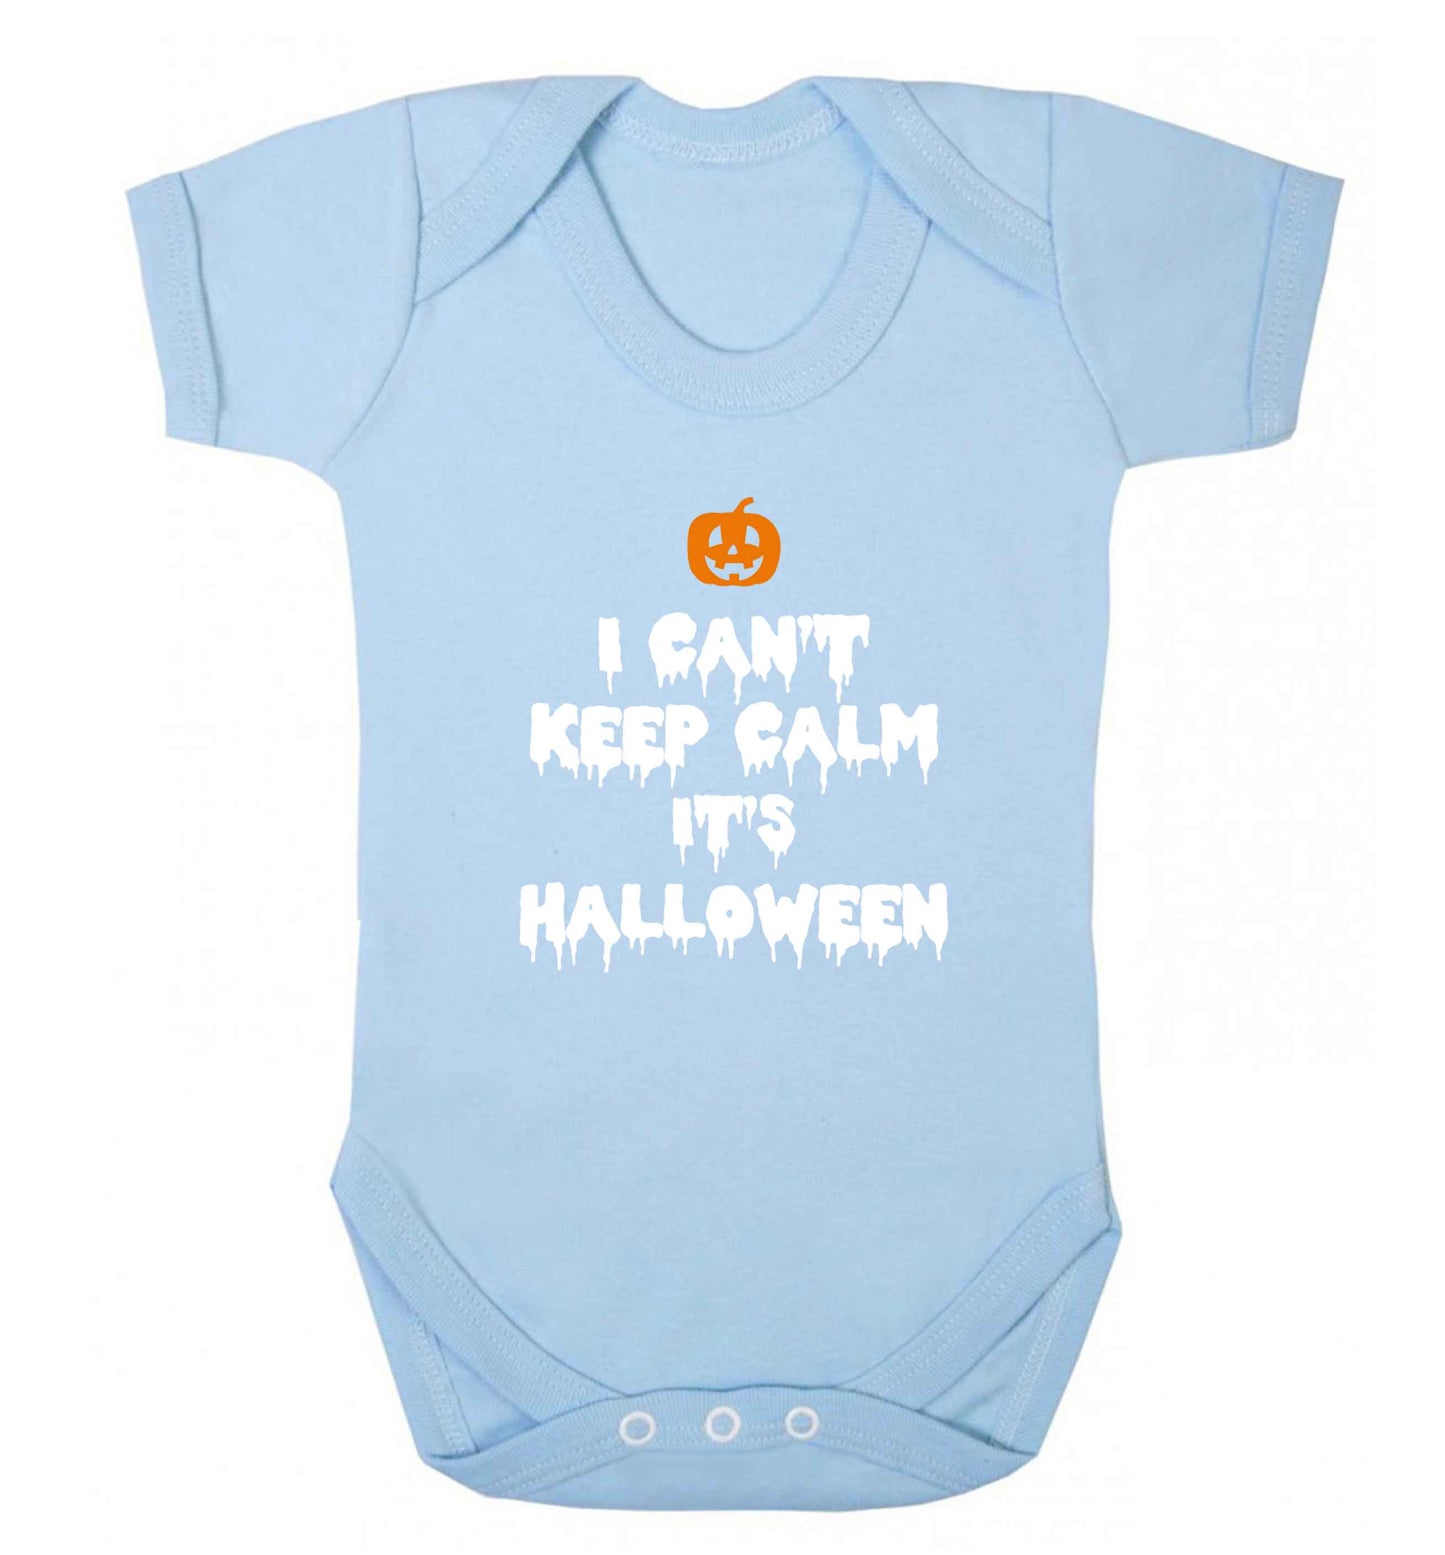 I can't keep calm it's halloween baby vest pale blue 18-24 months